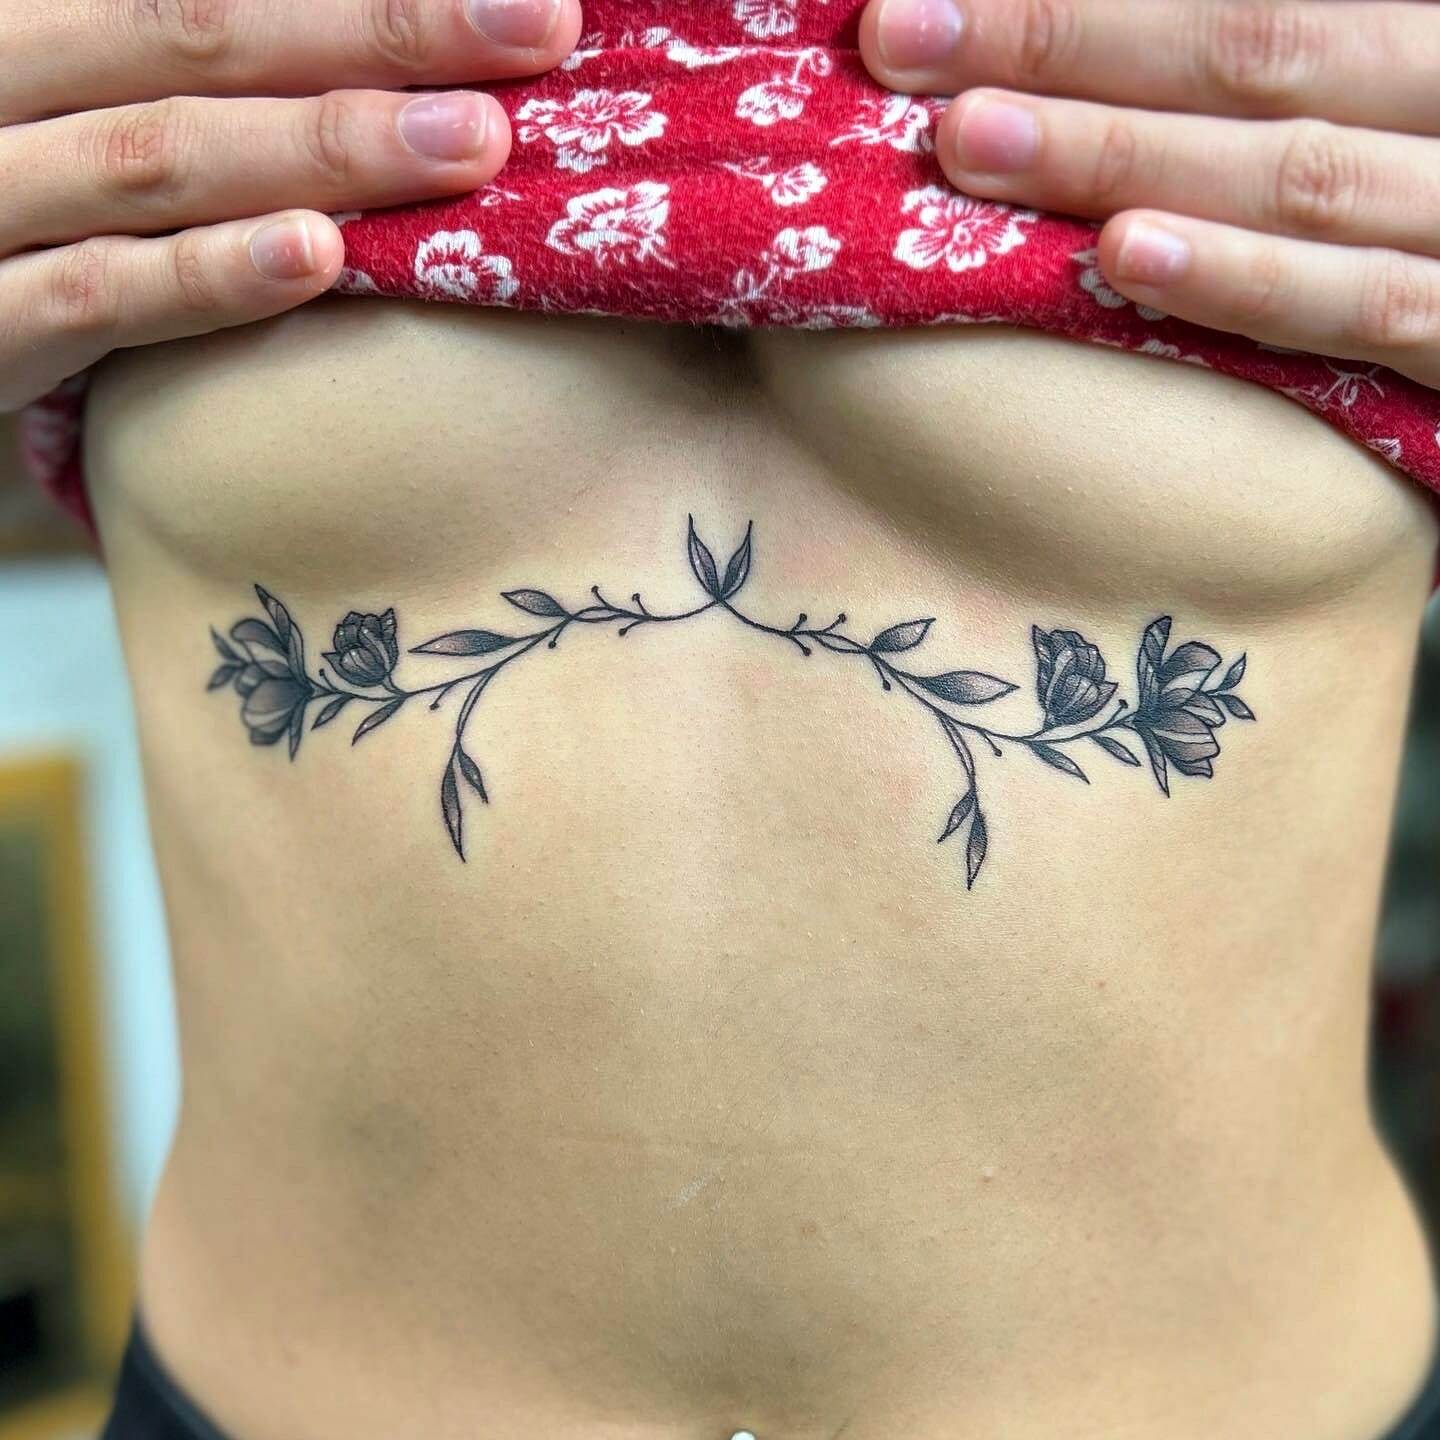 tattoo placement ideas you might like 🎀🌸 Which placement do you like the  most 💌 | Instagram